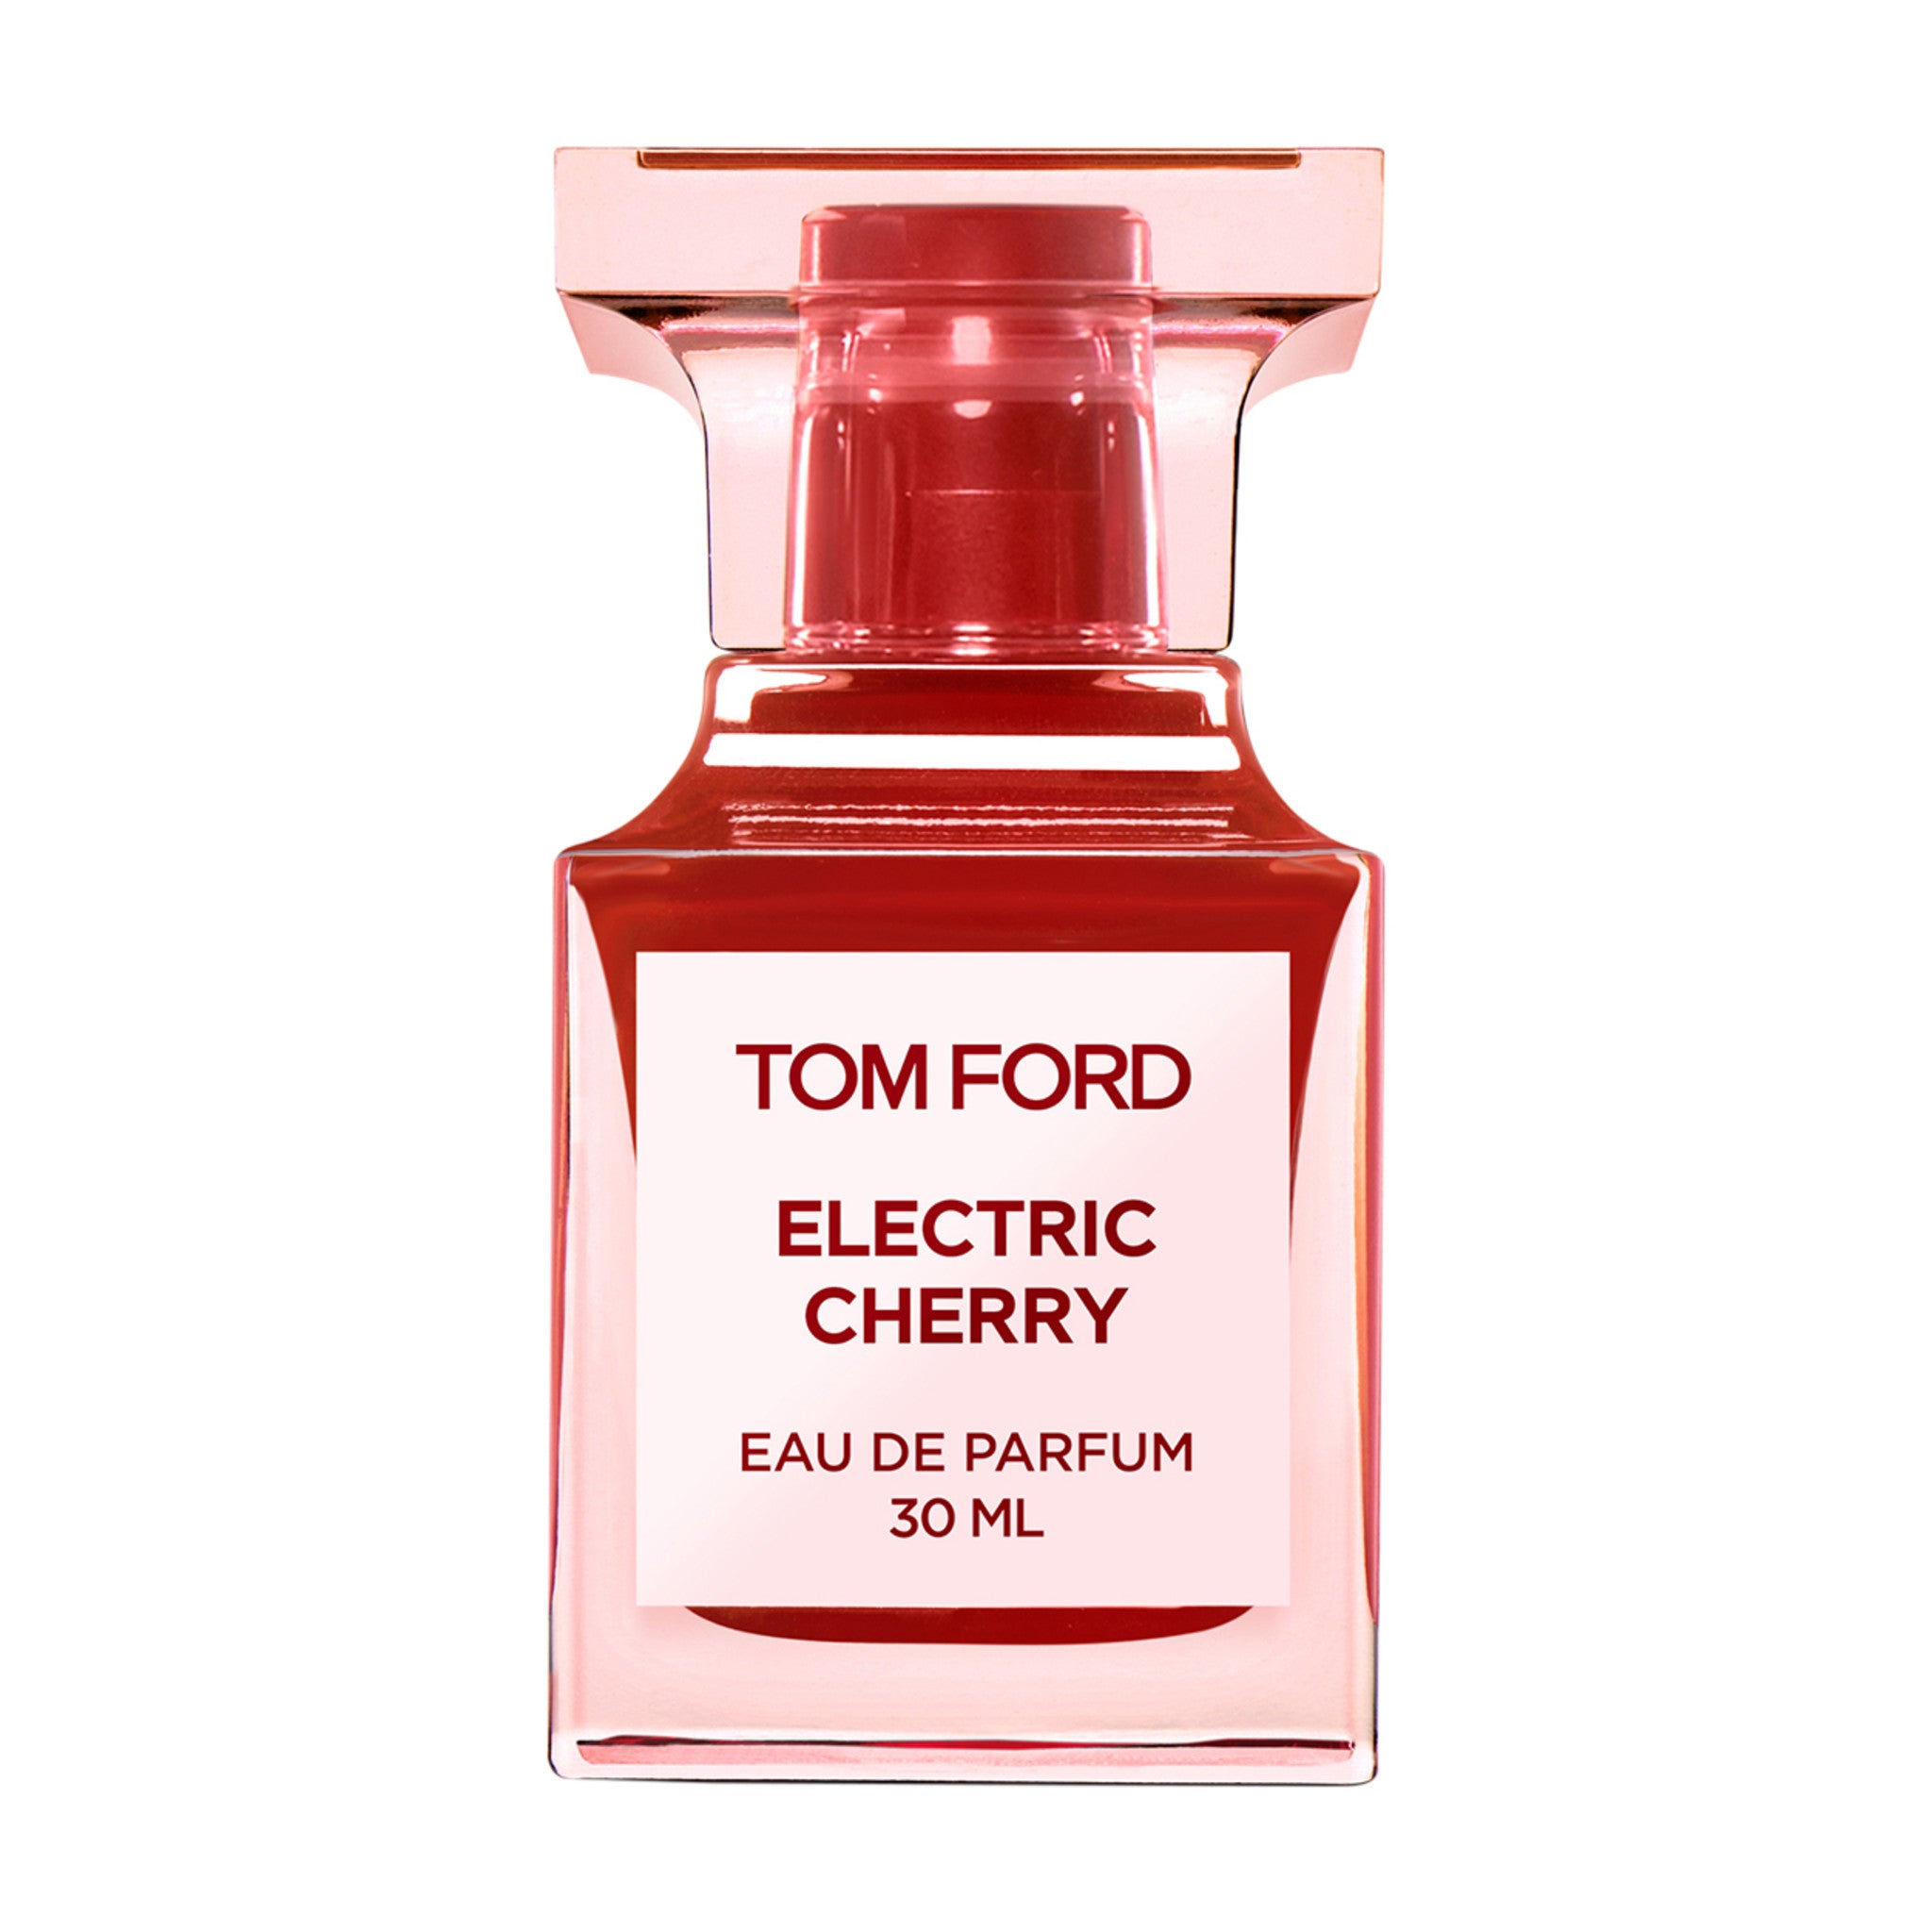 The Best Cherry Perfumes To Add a Fruity Finish to Your Look